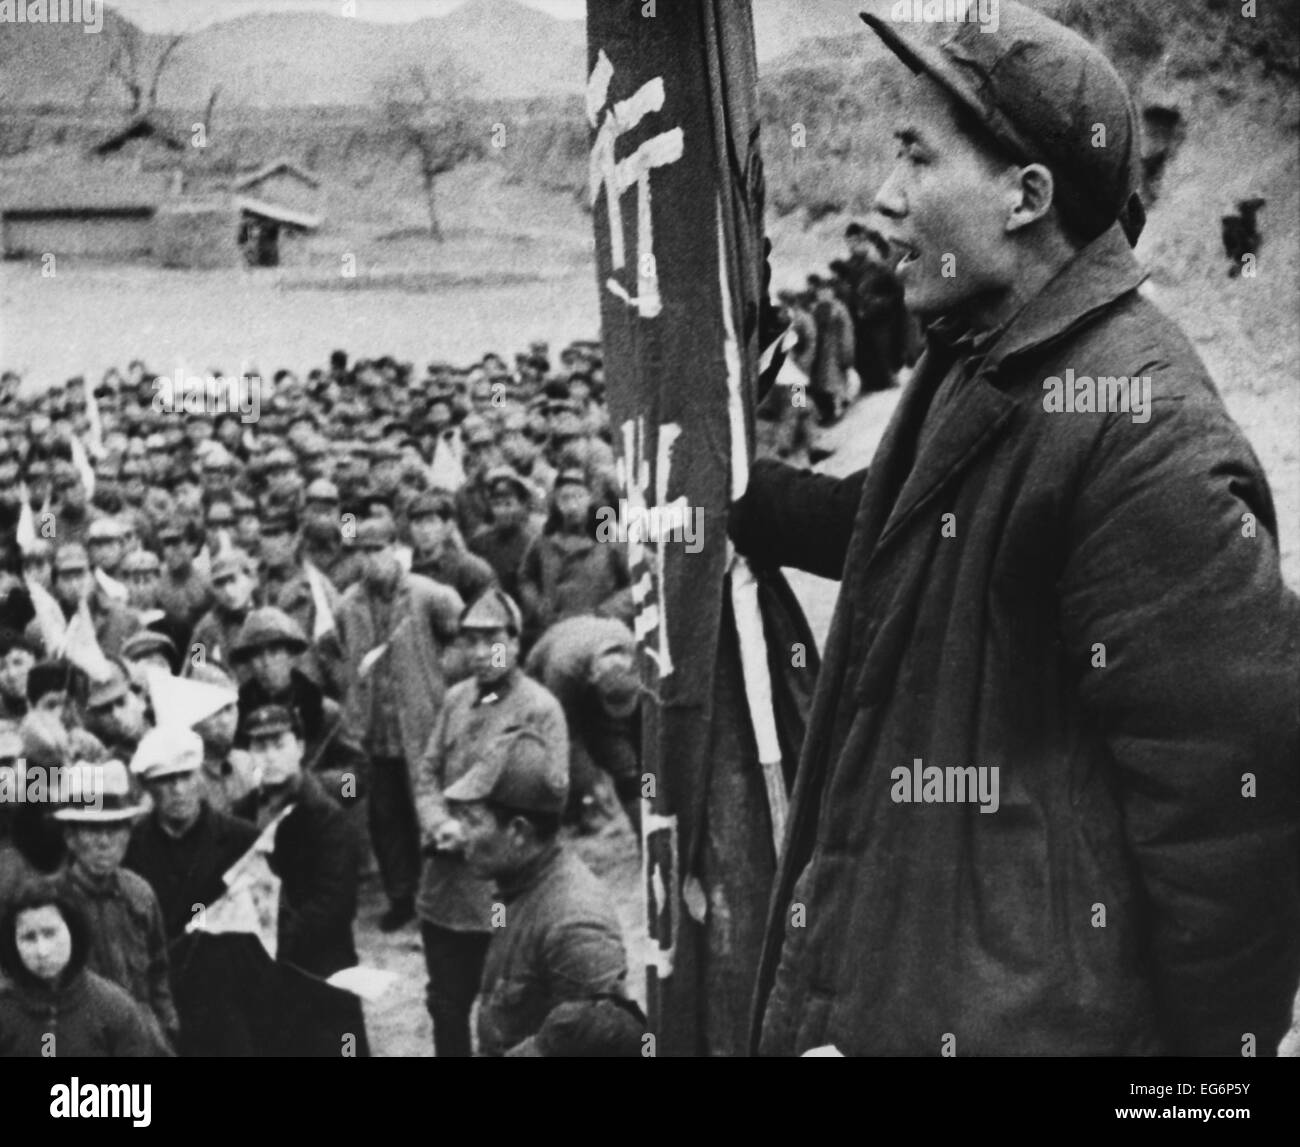 Mao Zedong, leader of China's Communists, addresses some of his followers. At this time the Communist armies controlled 80 Stock Photo